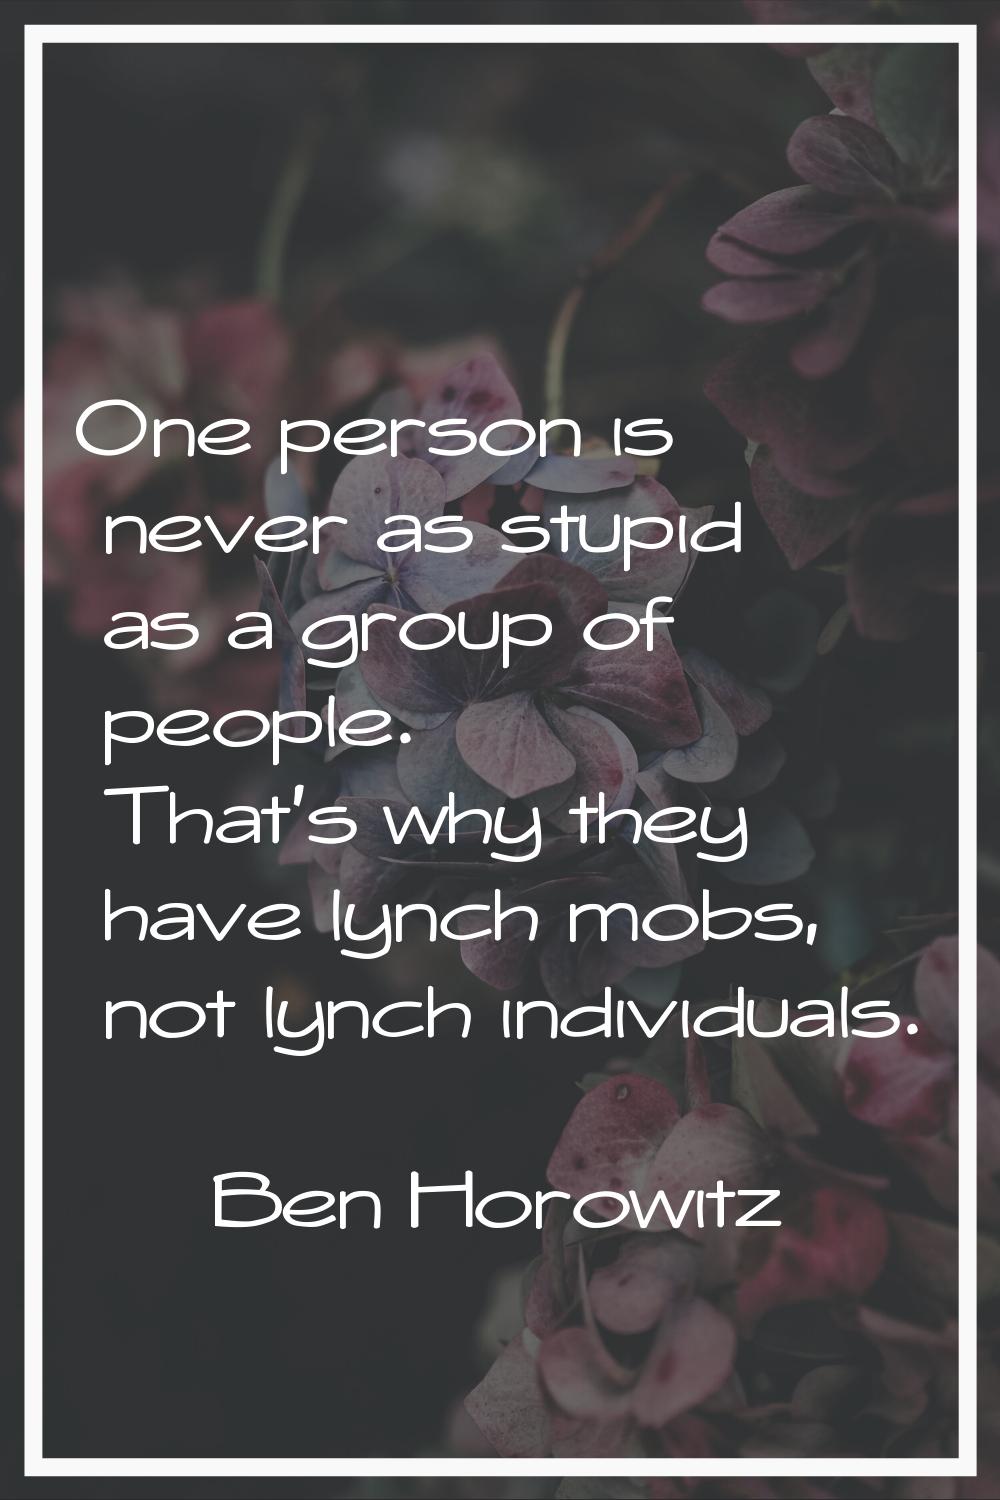 One person is never as stupid as a group of people. That's why they have lynch mobs, not lynch indi